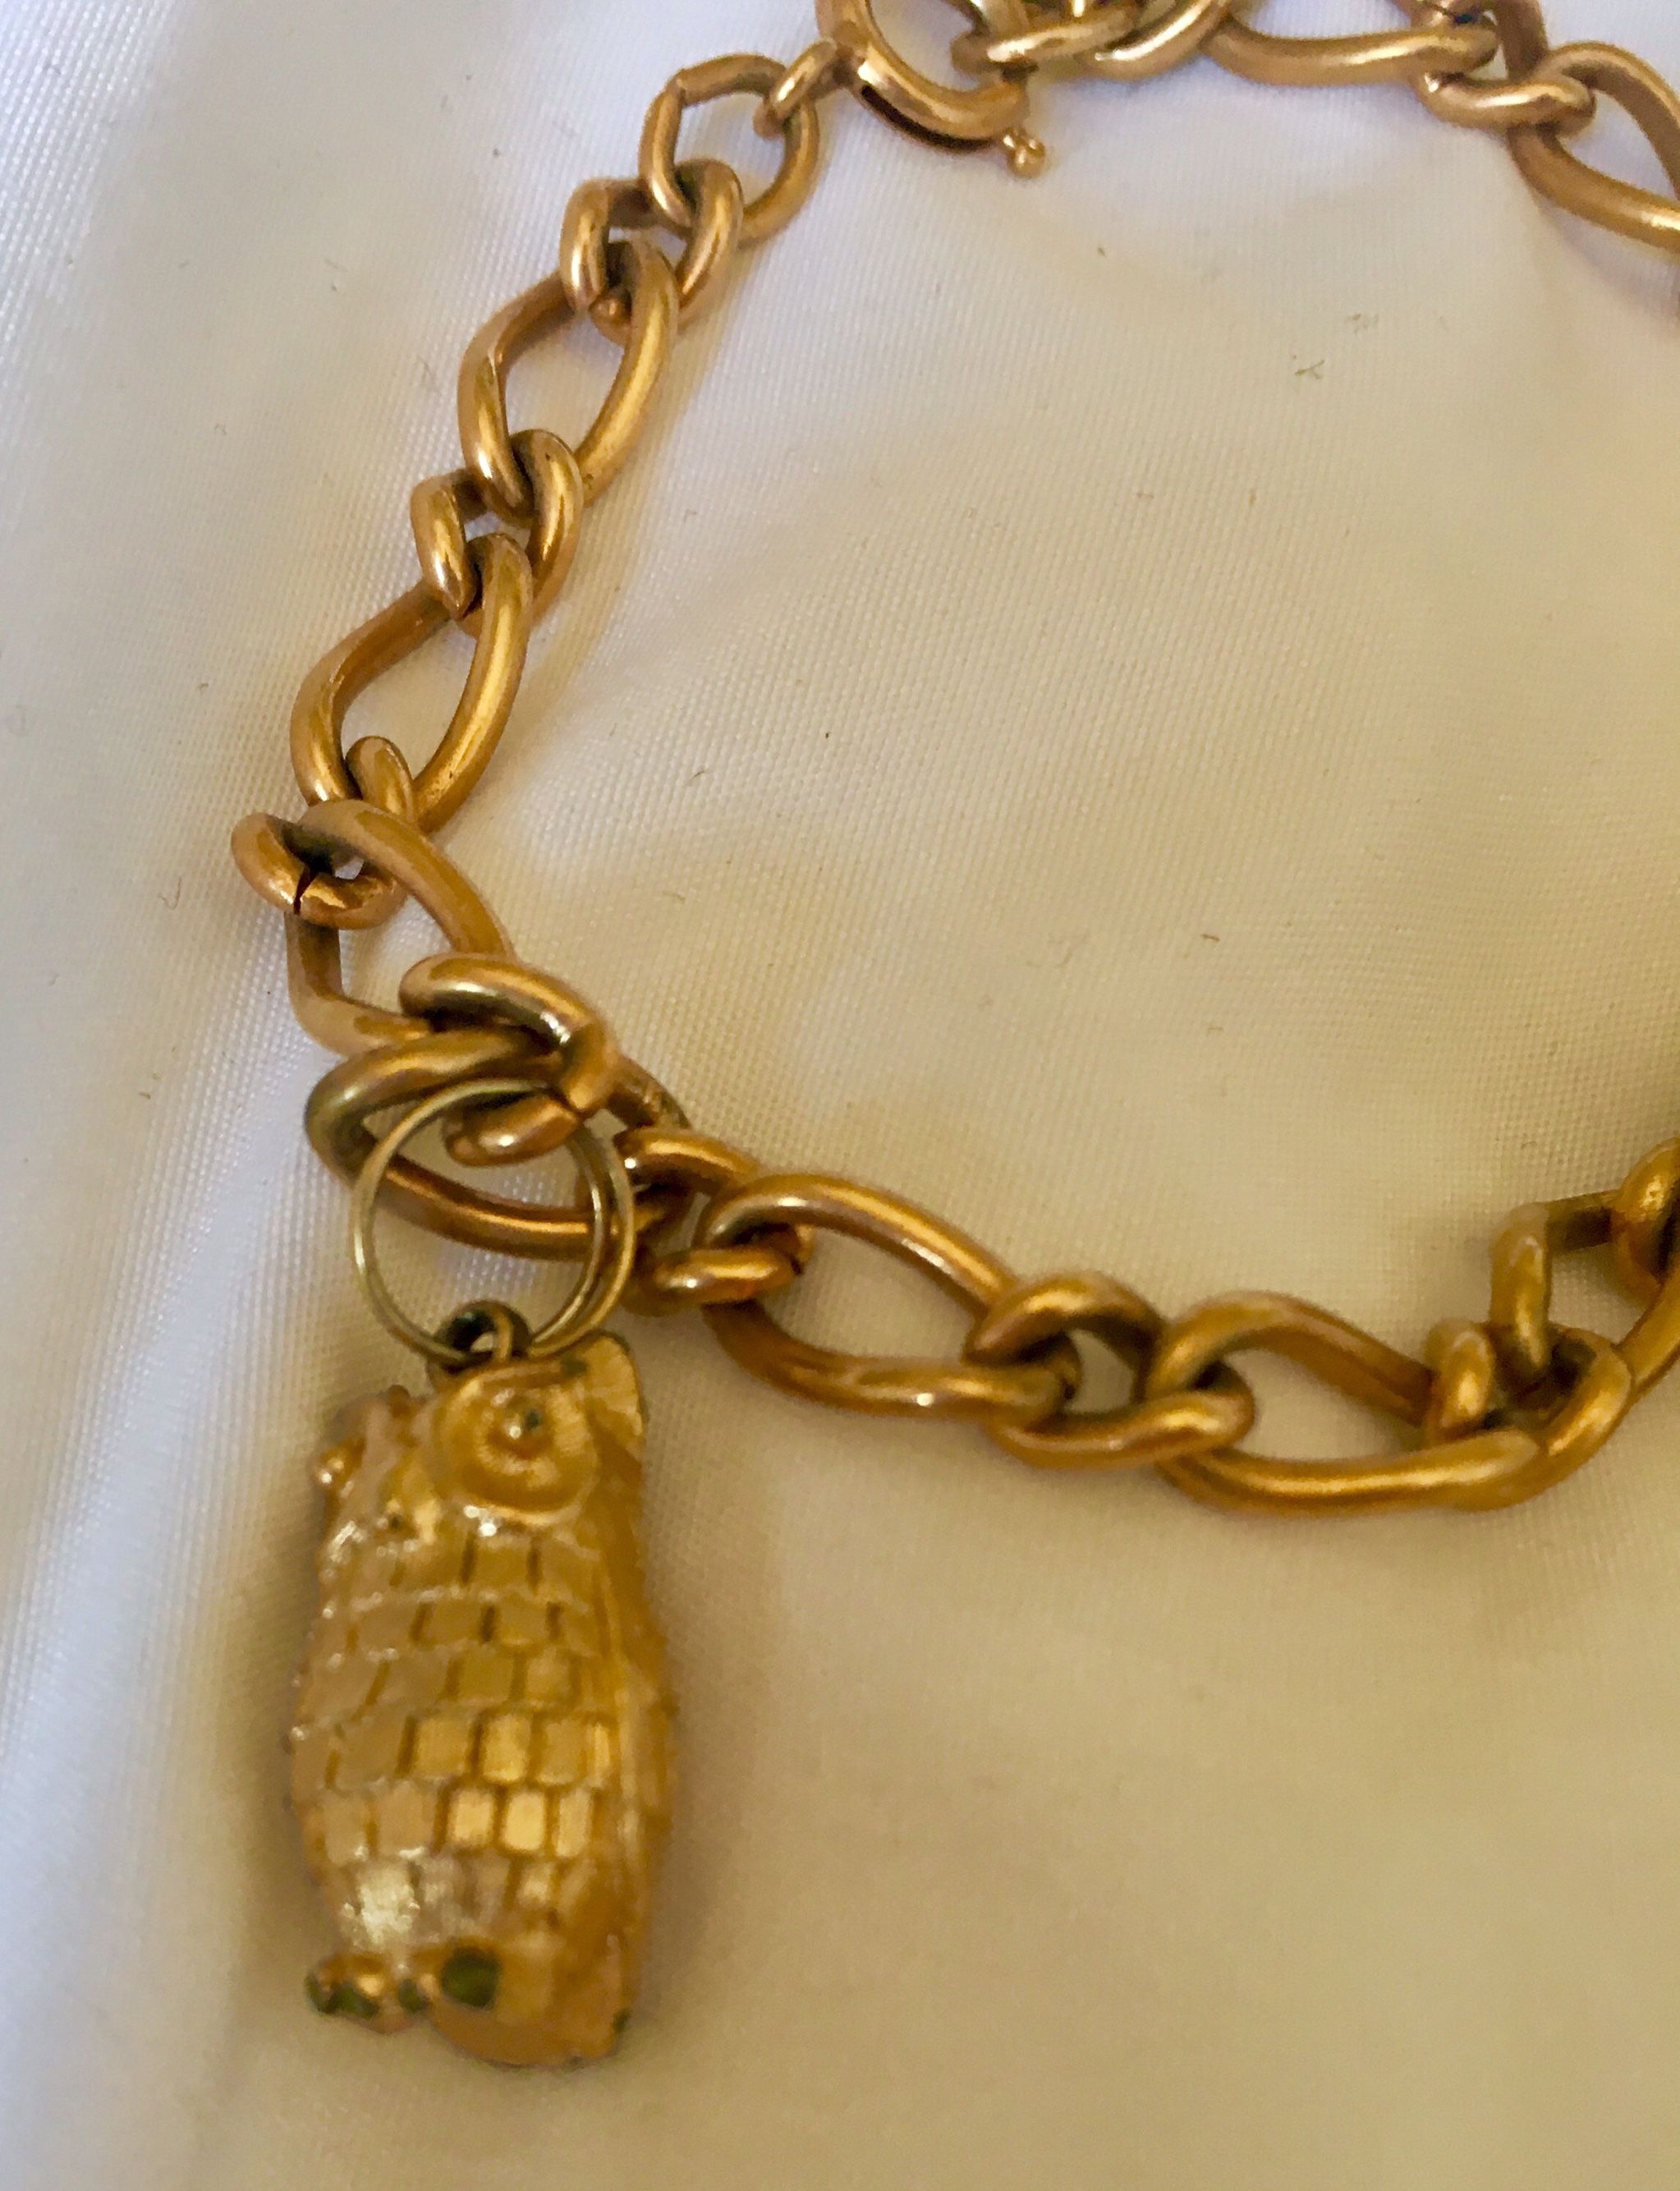 Chanel Vintage Gold Charm Bracelet, 1986-1992 Available For Immediate Sale  At Sotheby's